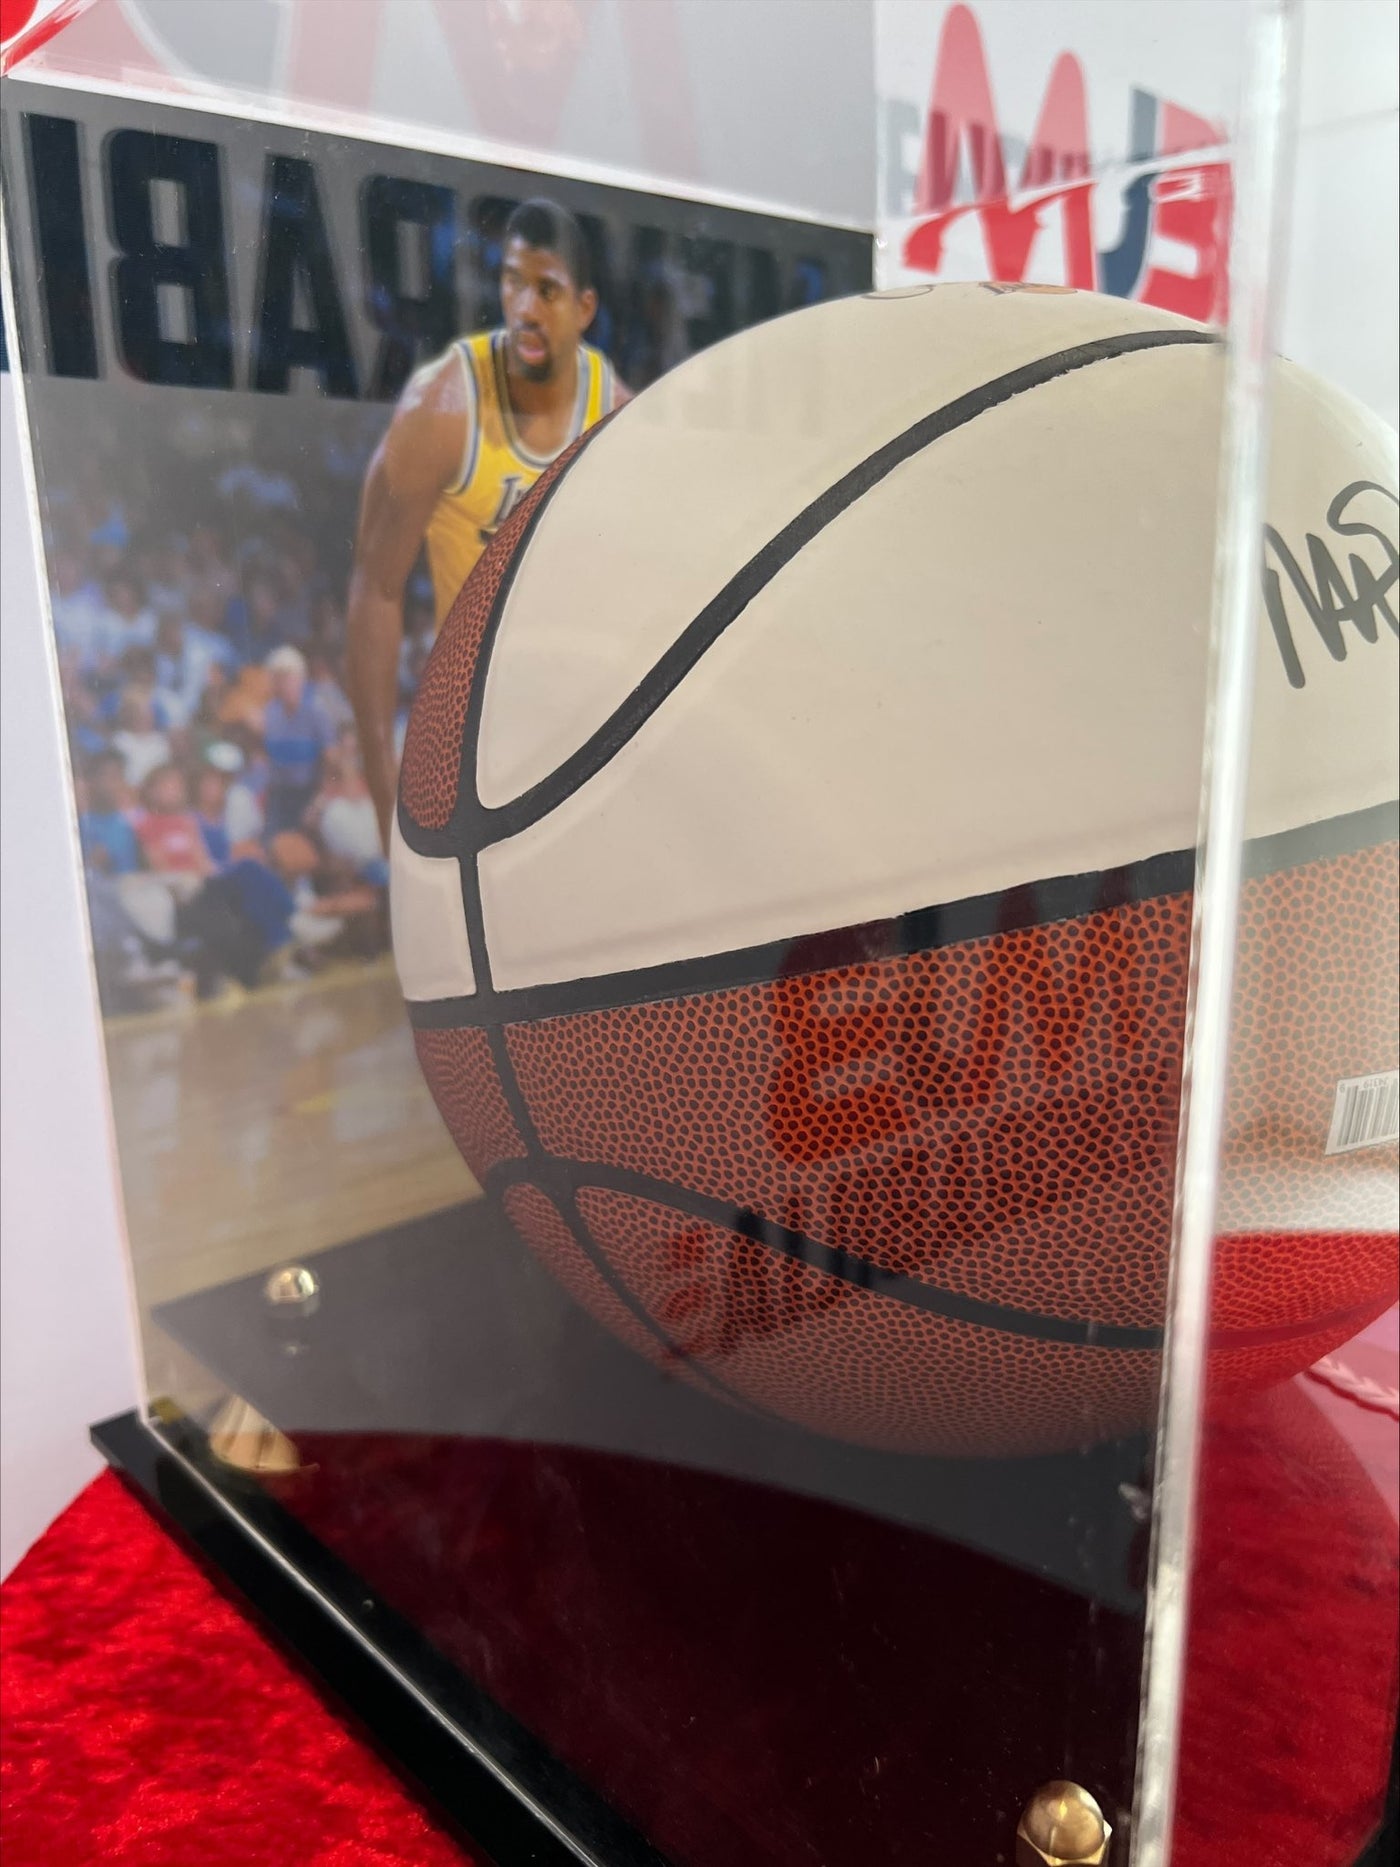 Magic Johnson Signed Authentic La Lakers Championship Basketball with Beckett Authentication